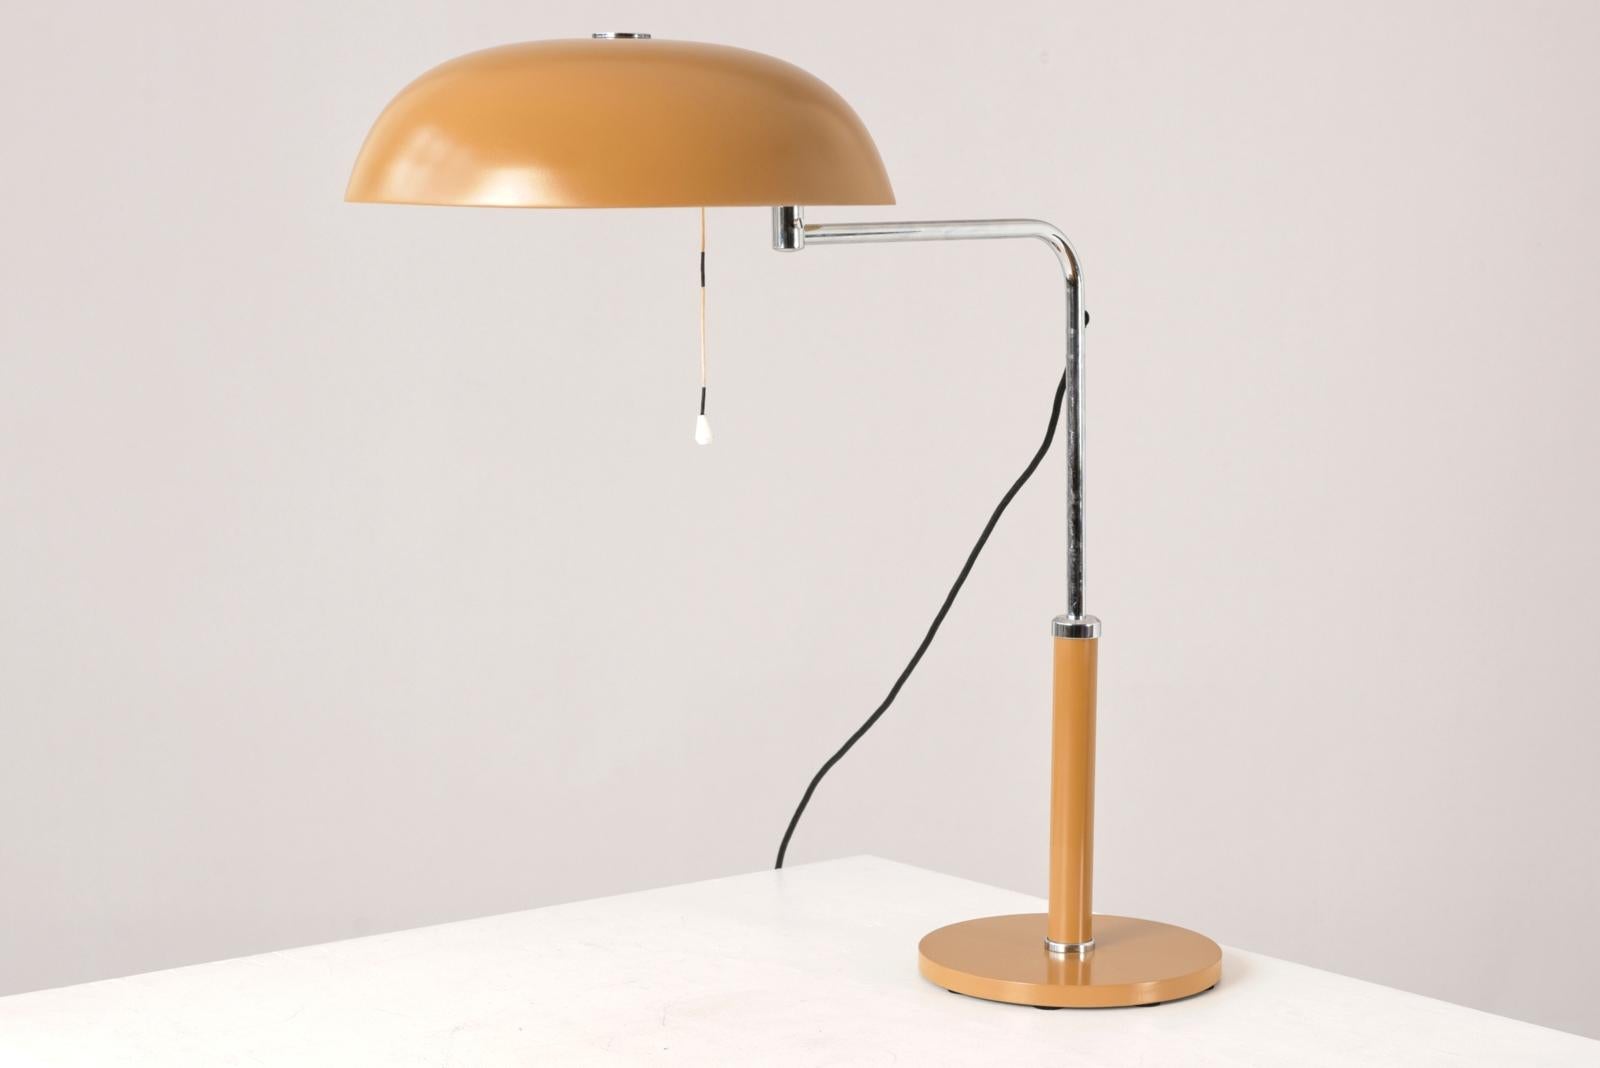 Metal Table Lamp Quick 1500 by Alfred Müller for Amba, Switzerland - 1959 For Sale